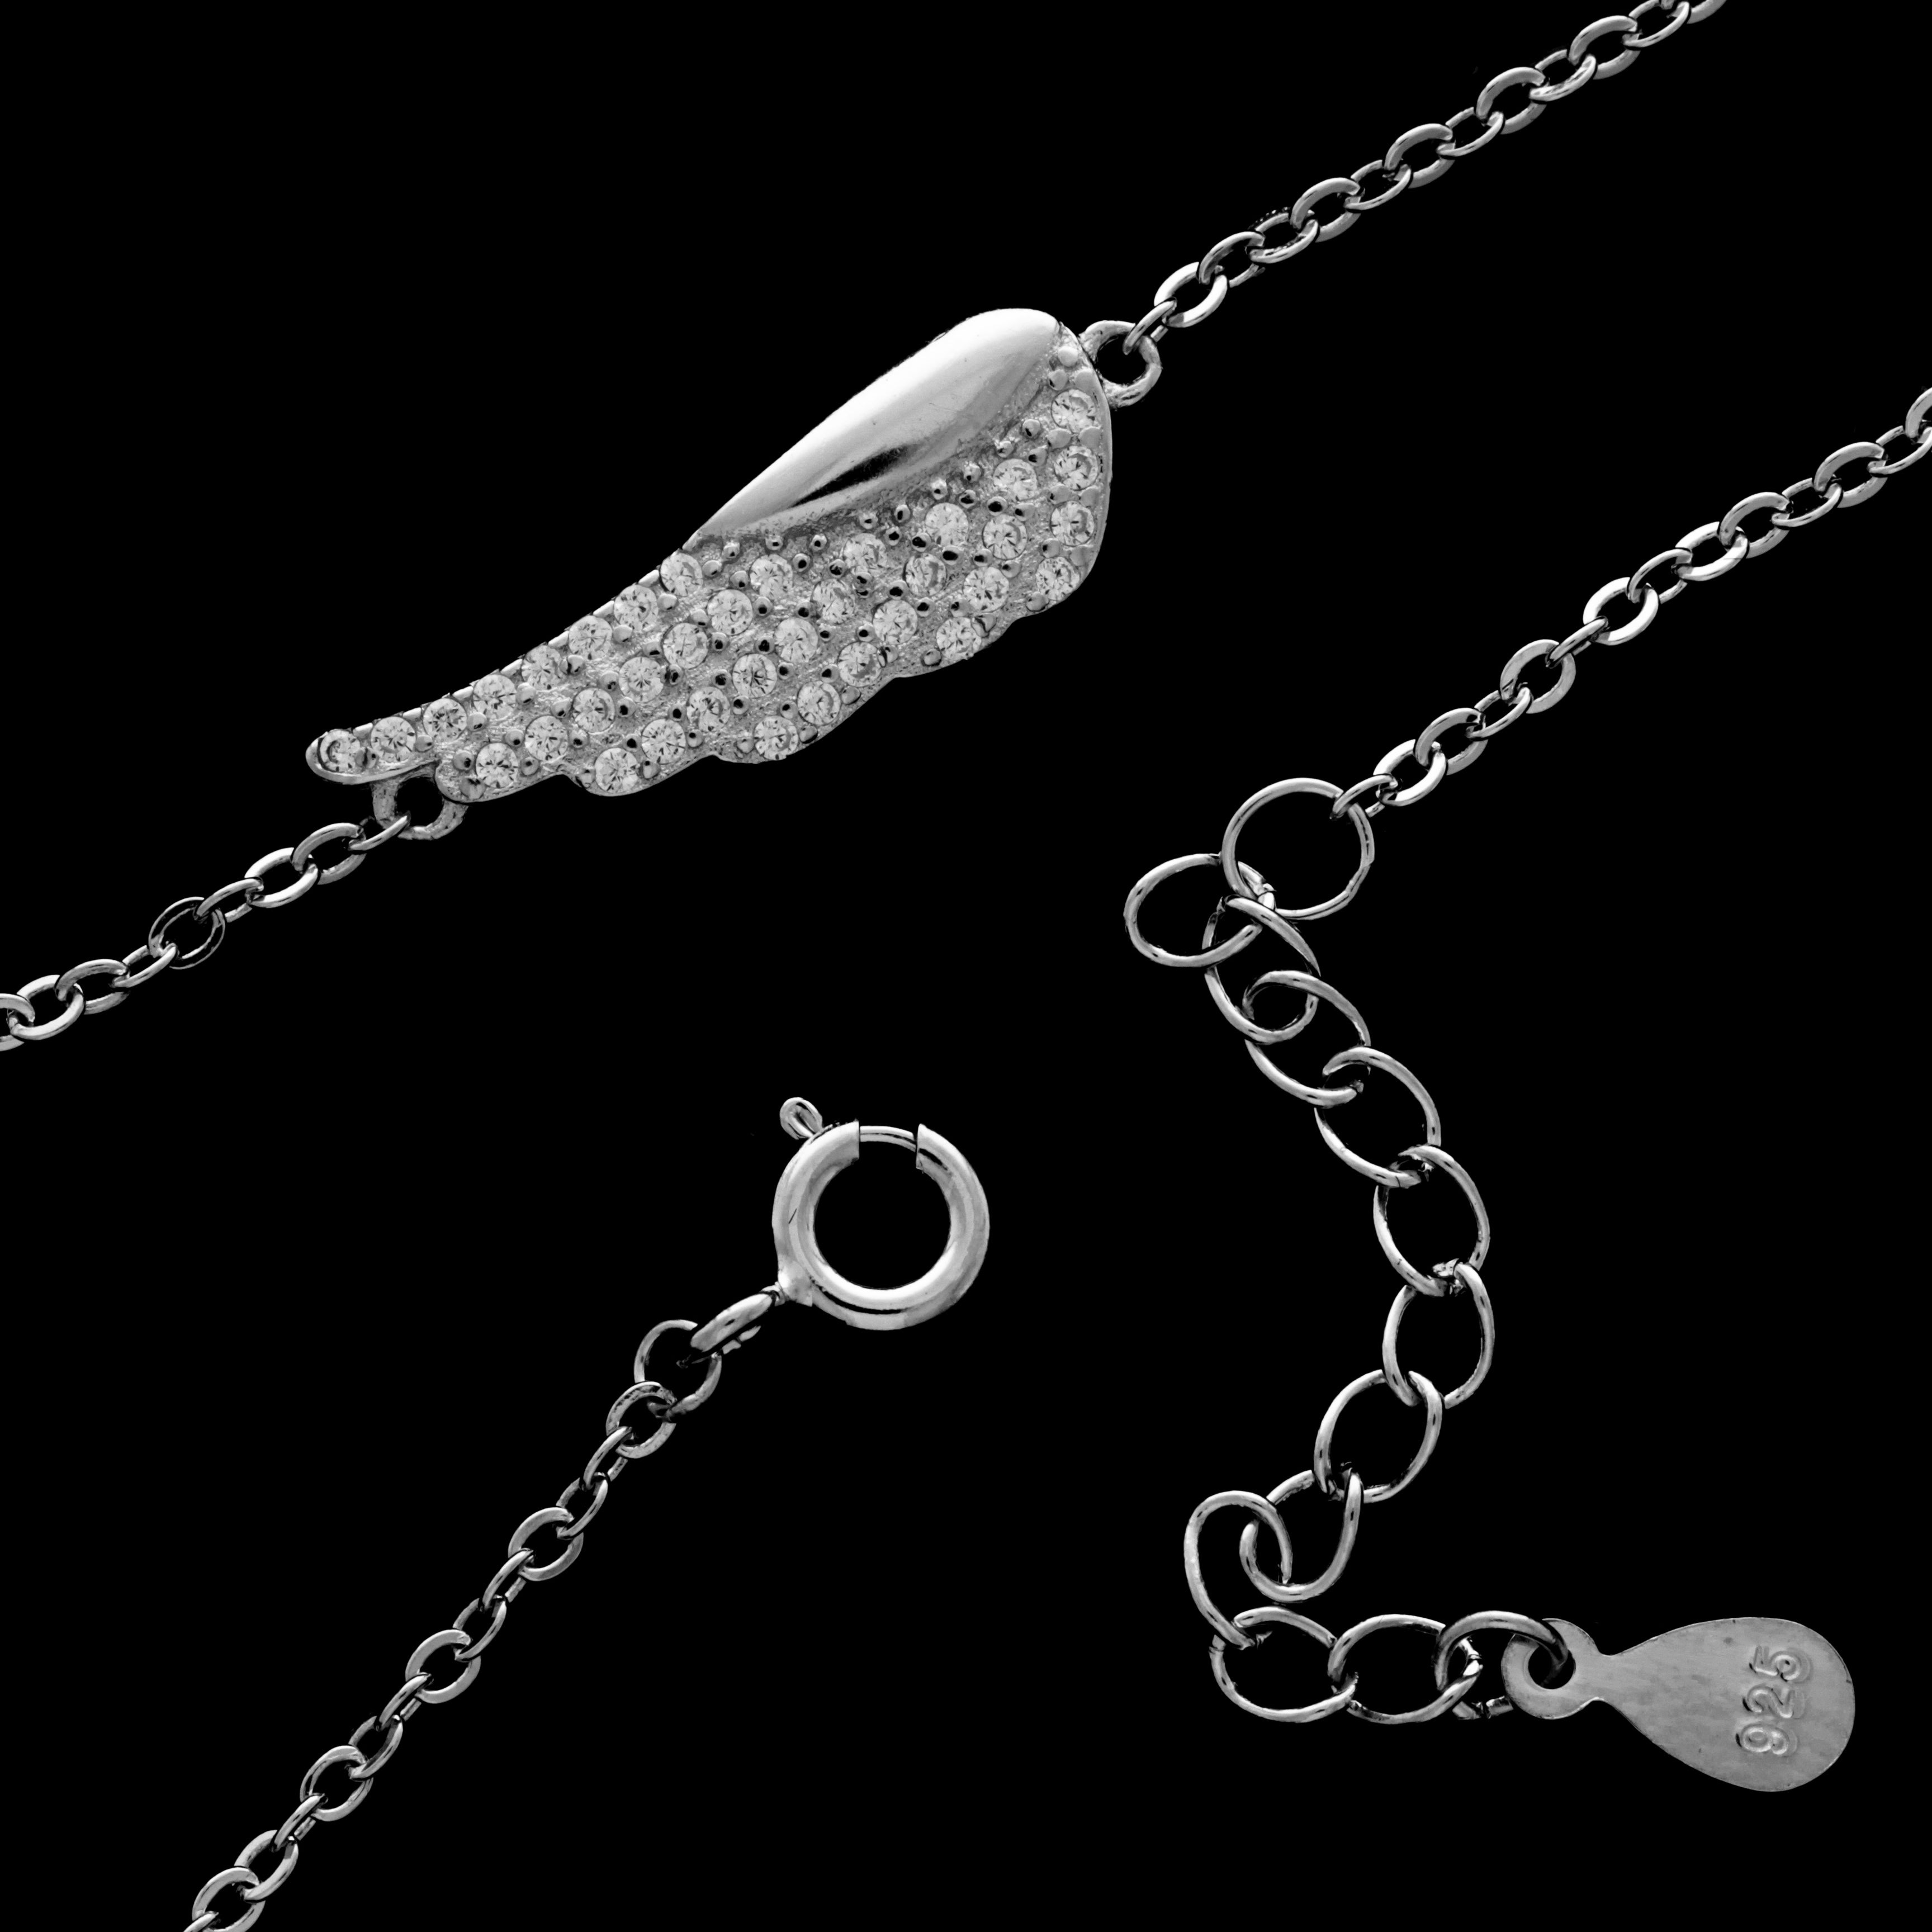 925 Sterling Silver Rhodium Plated Angel Wing with Cubic Zirconia Stones Bracelet - CH-1045